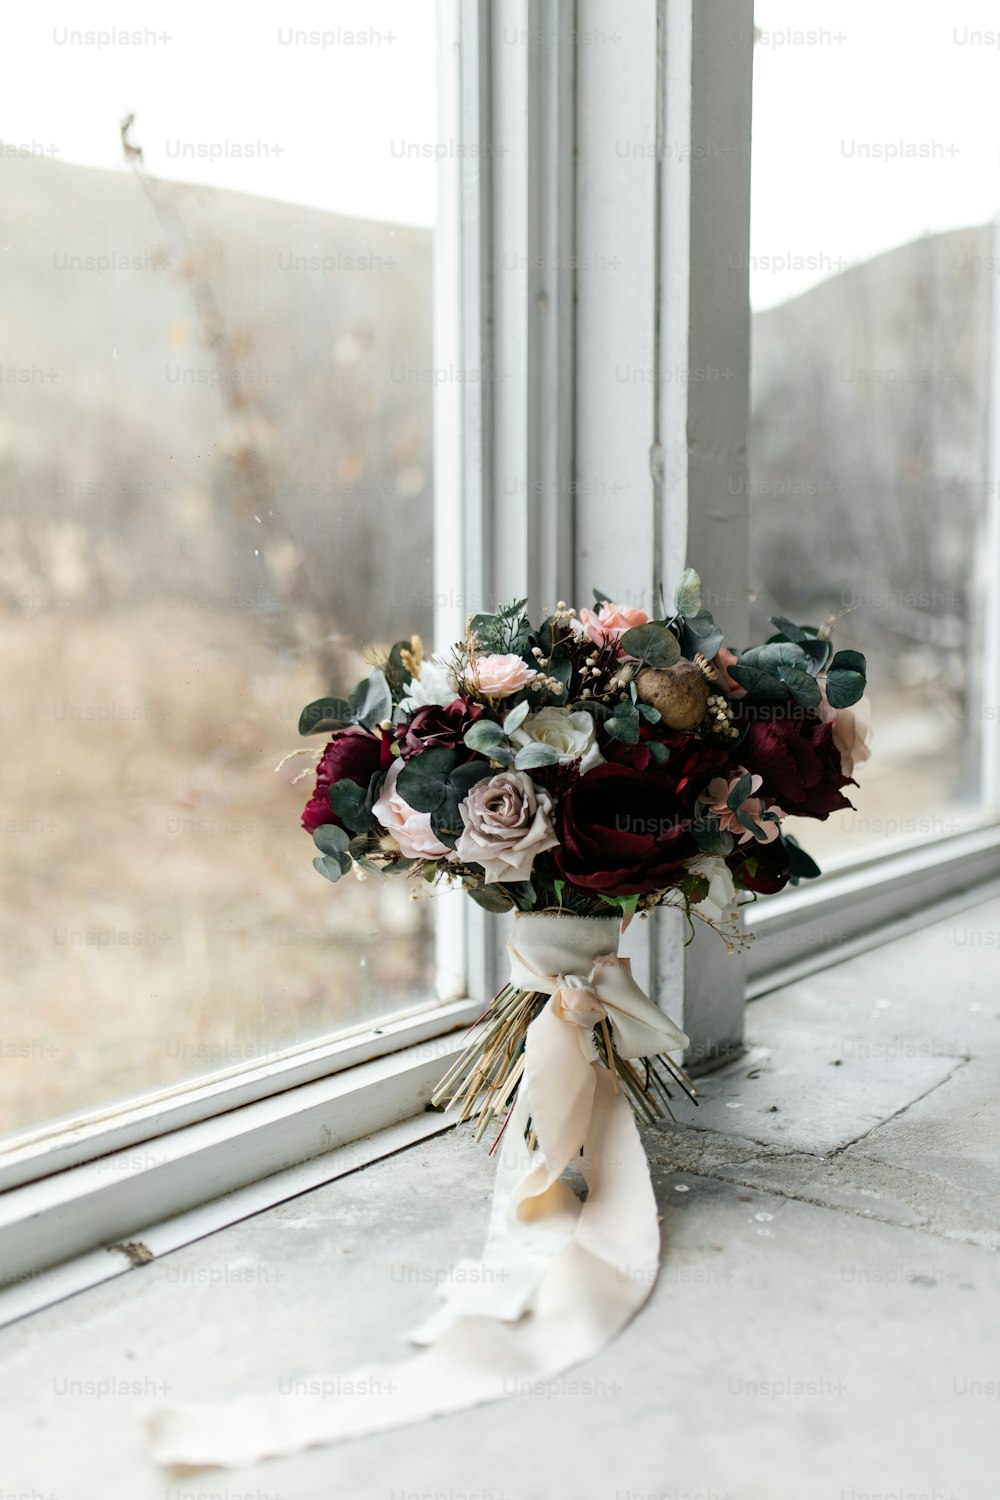 a bouquet of flowers sitting on a window sill